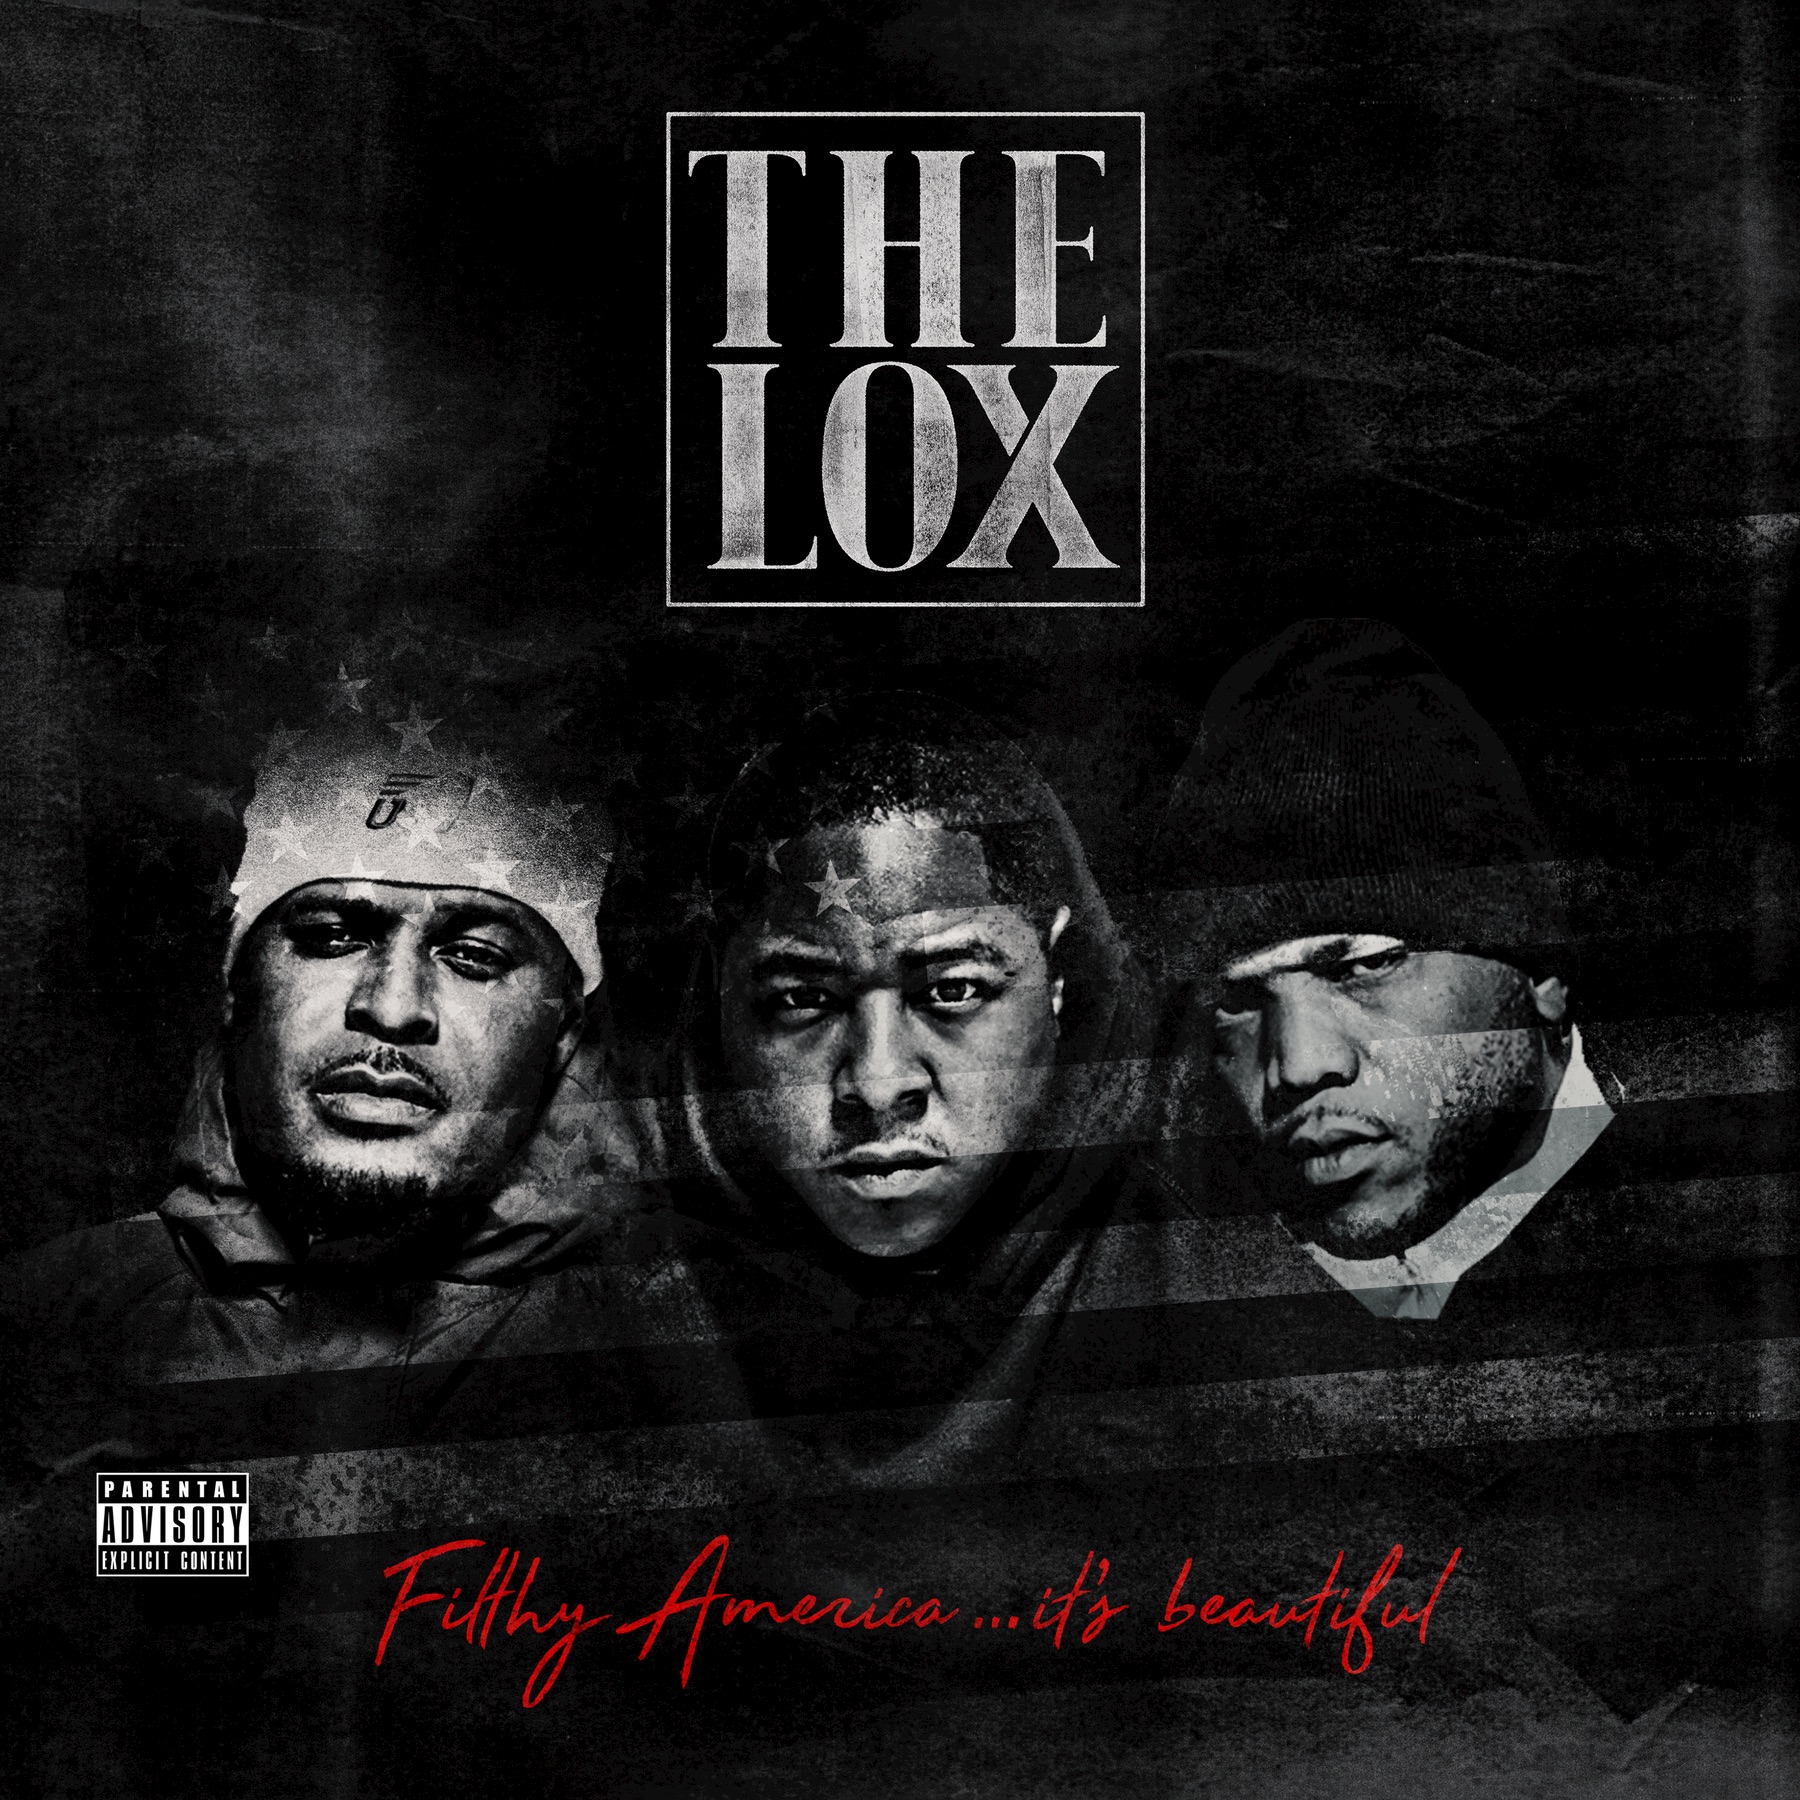 The Lox - What Else You Need To Know